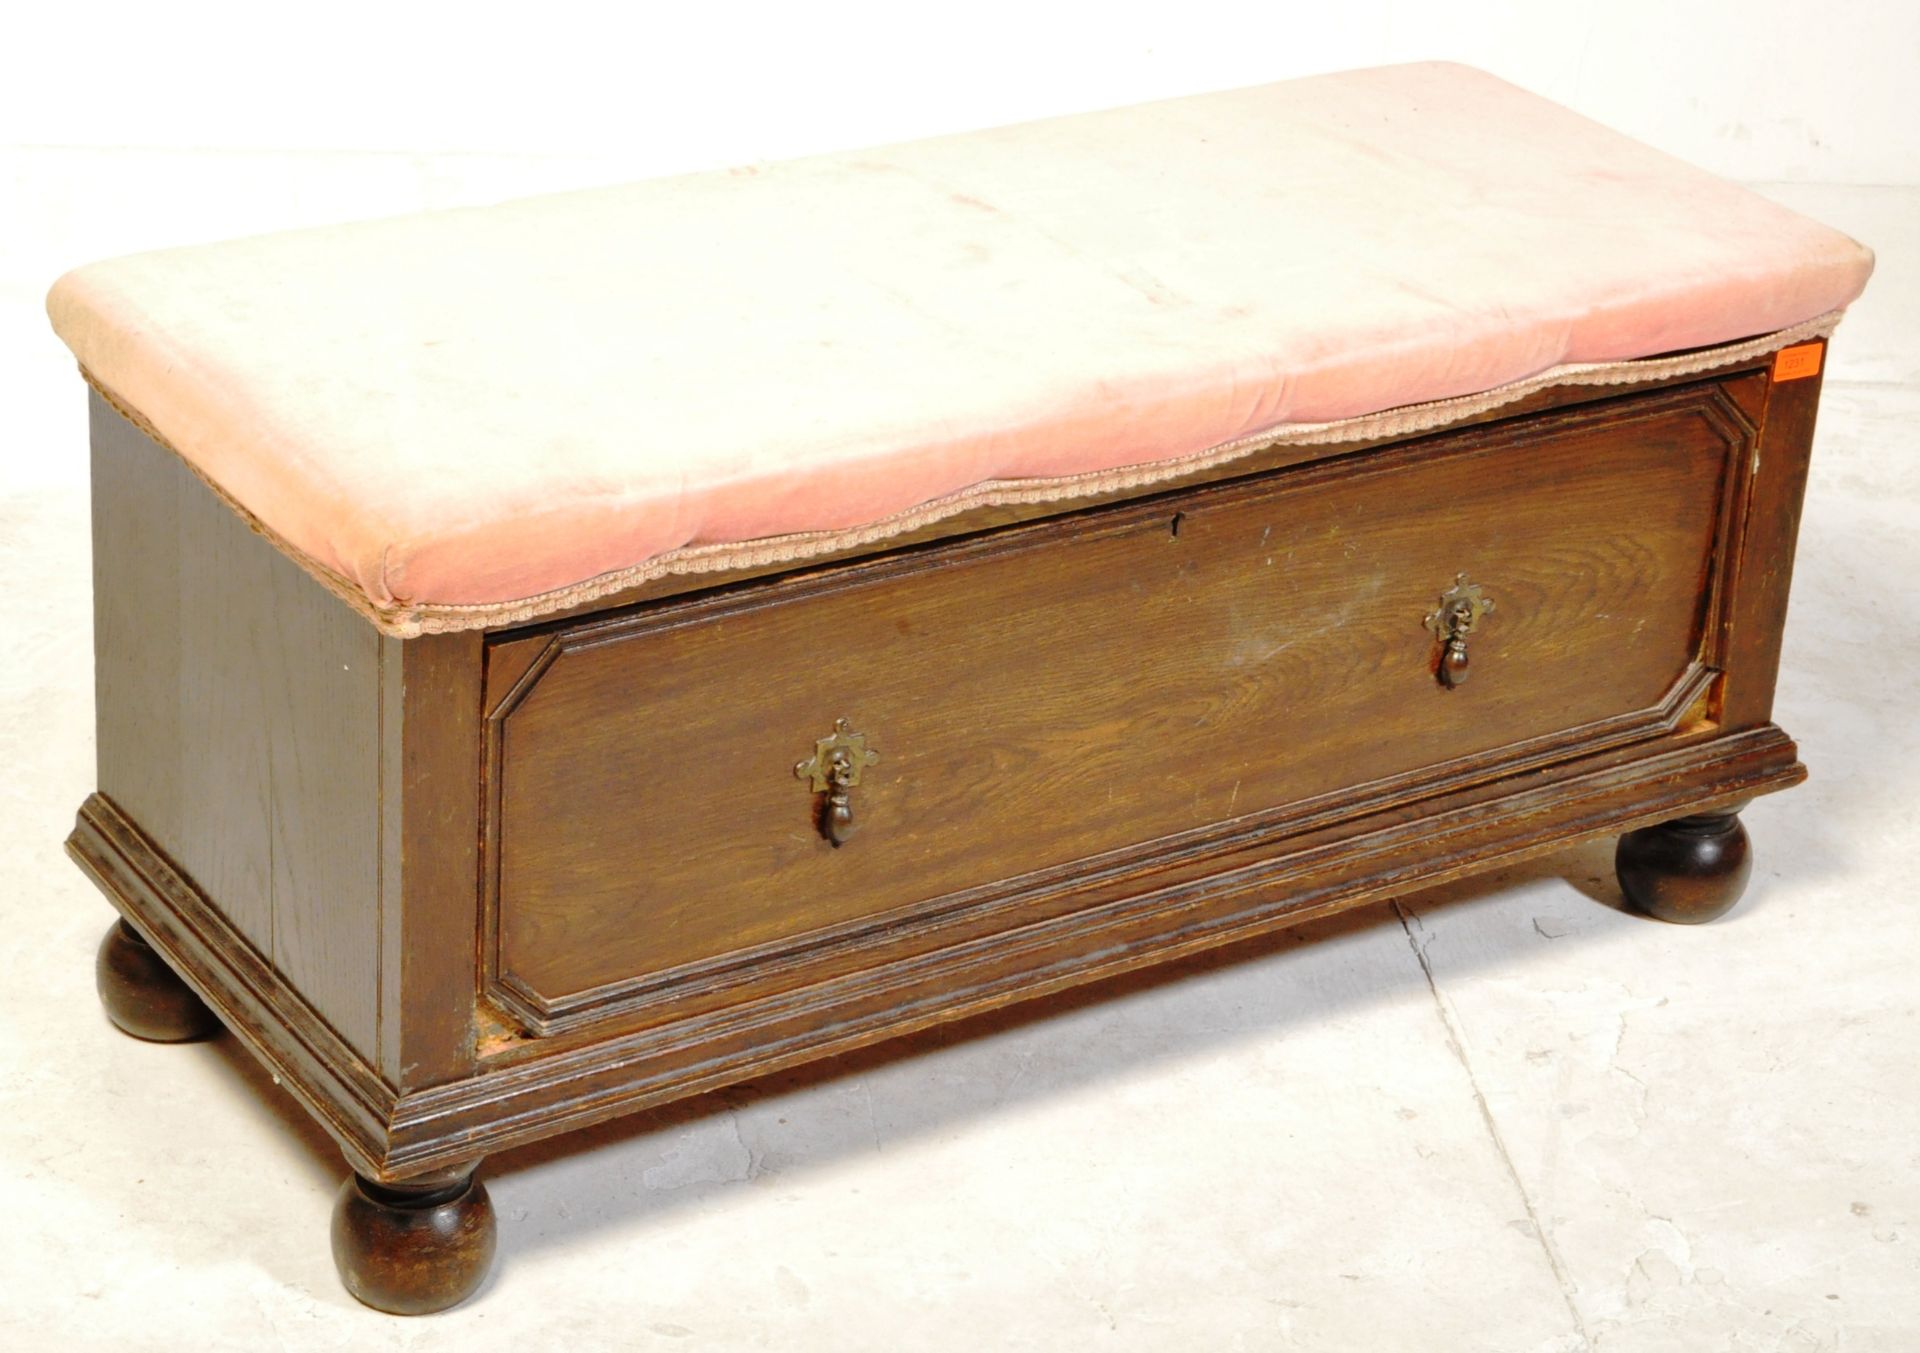 EARLY 20TH CENTURY CONVERTED OAK OTTOMAN - Image 2 of 6